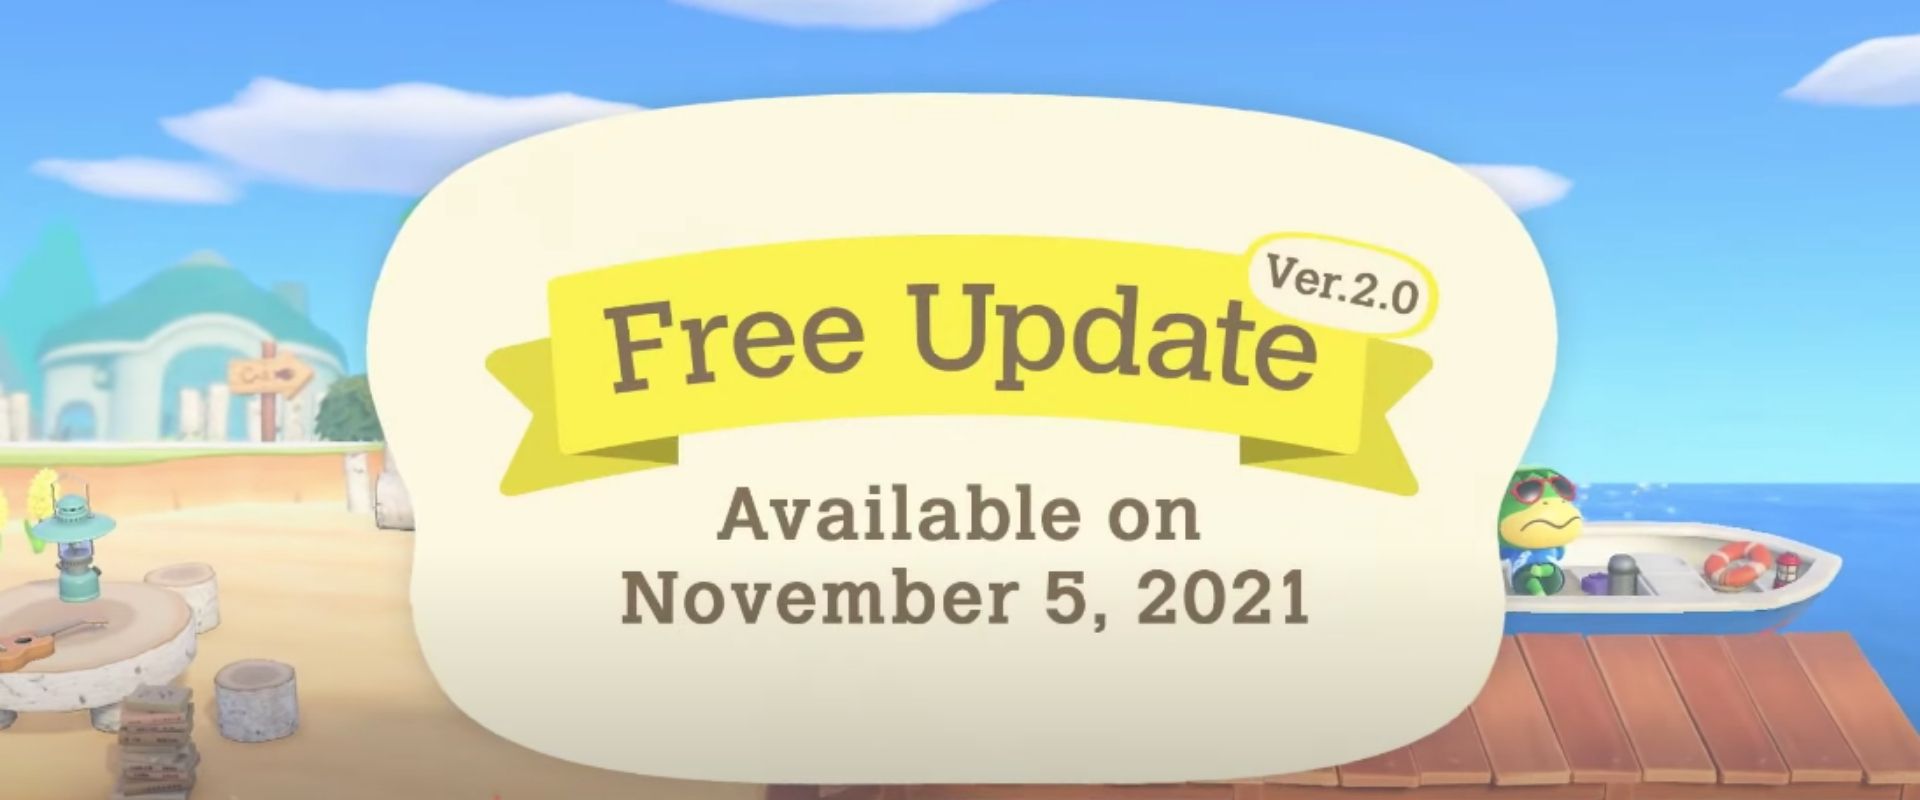 Everything You Need to Know About the Free Update for Animal Crossing New Horizons